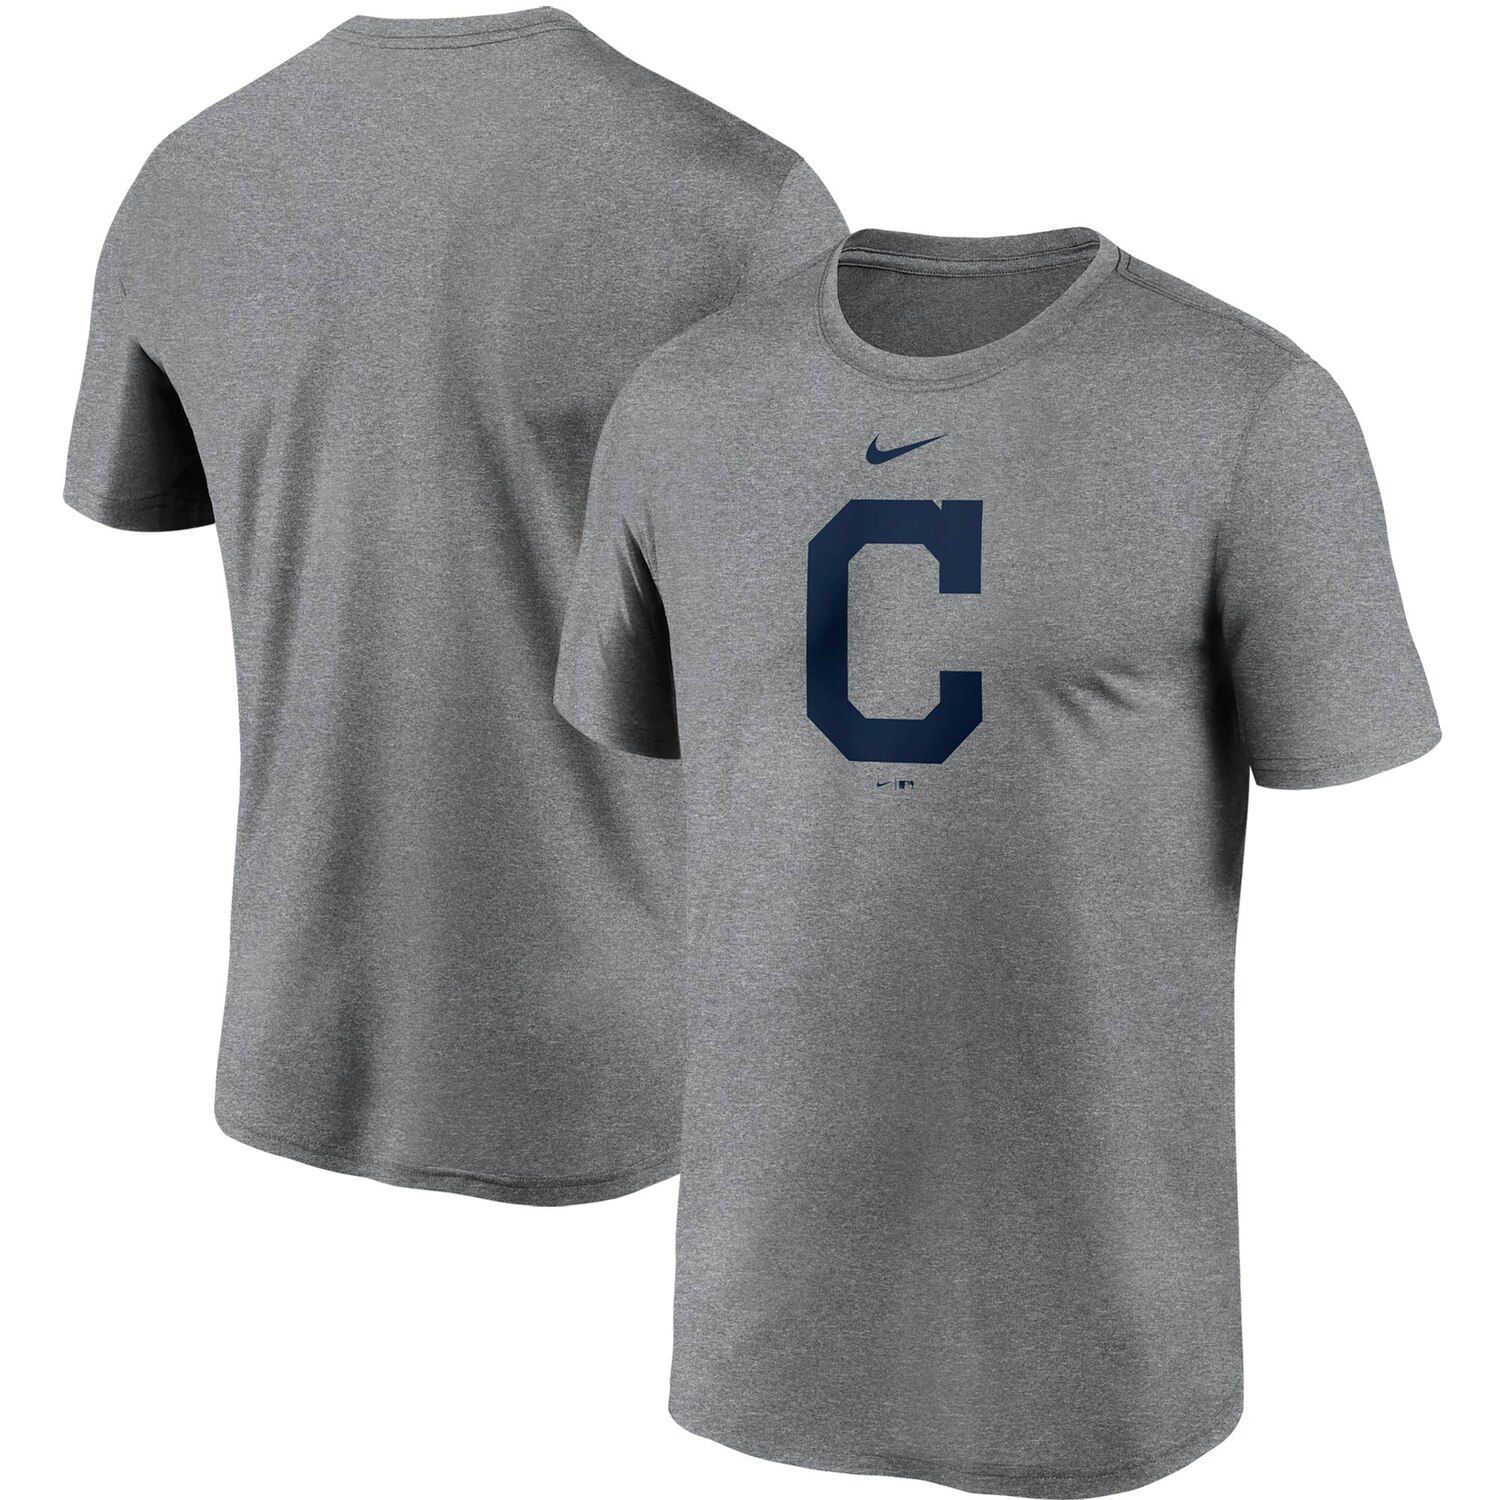 cleveland indian t shirts online